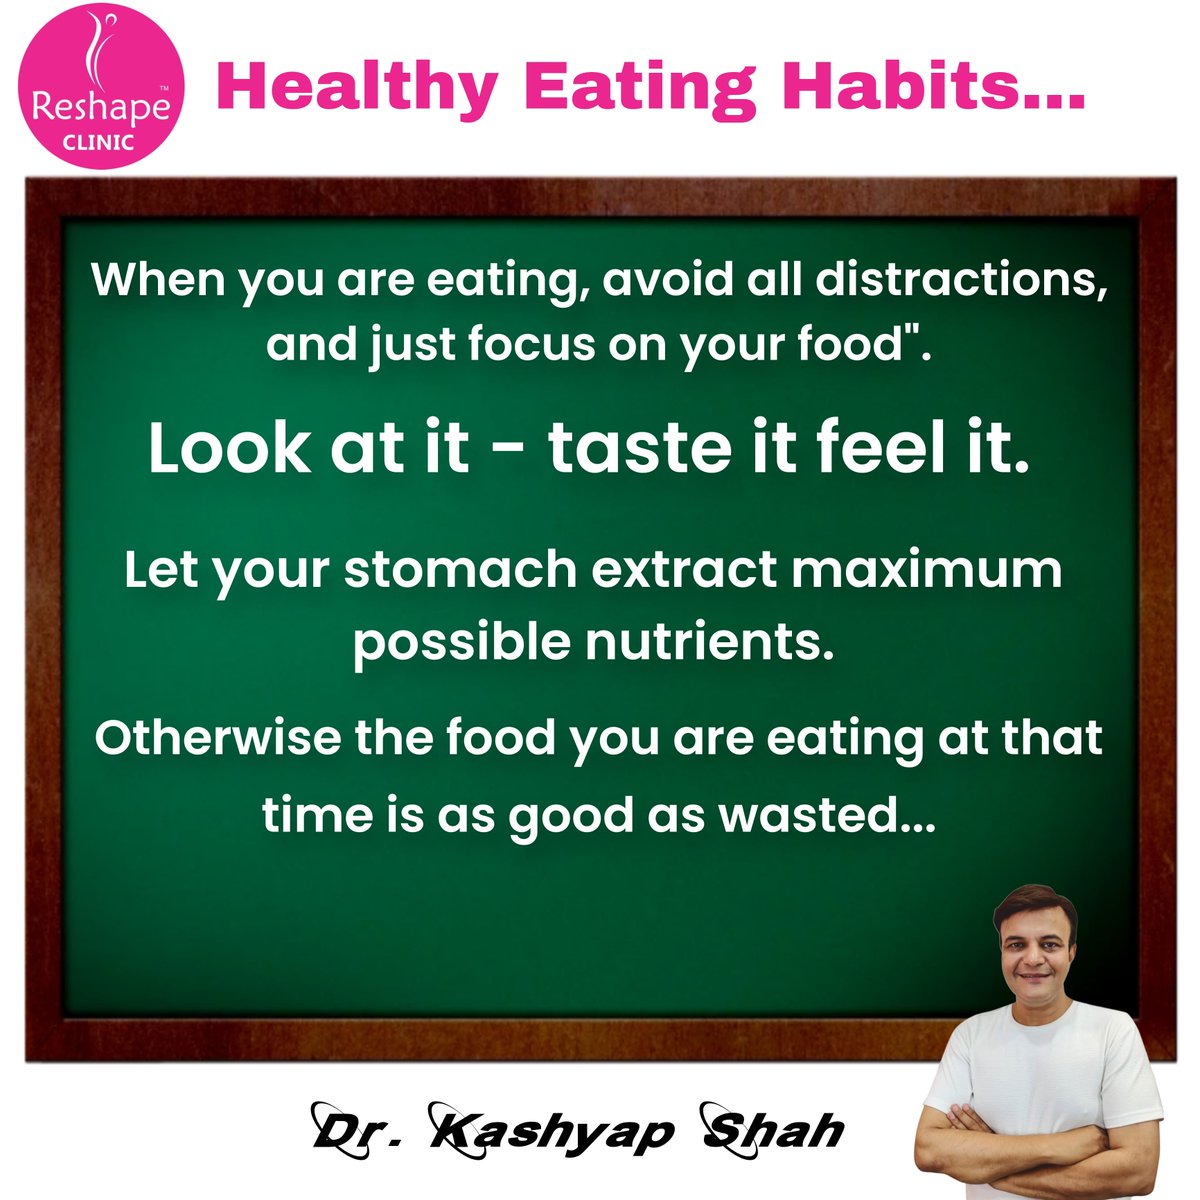 You can minimize distractions by putting away your mobile and turning off the TV. Also, you can practice gratitude by taking a moment to appreciate your food and the people who brought it to your table.
#reshapeclinic #drkashyapshah